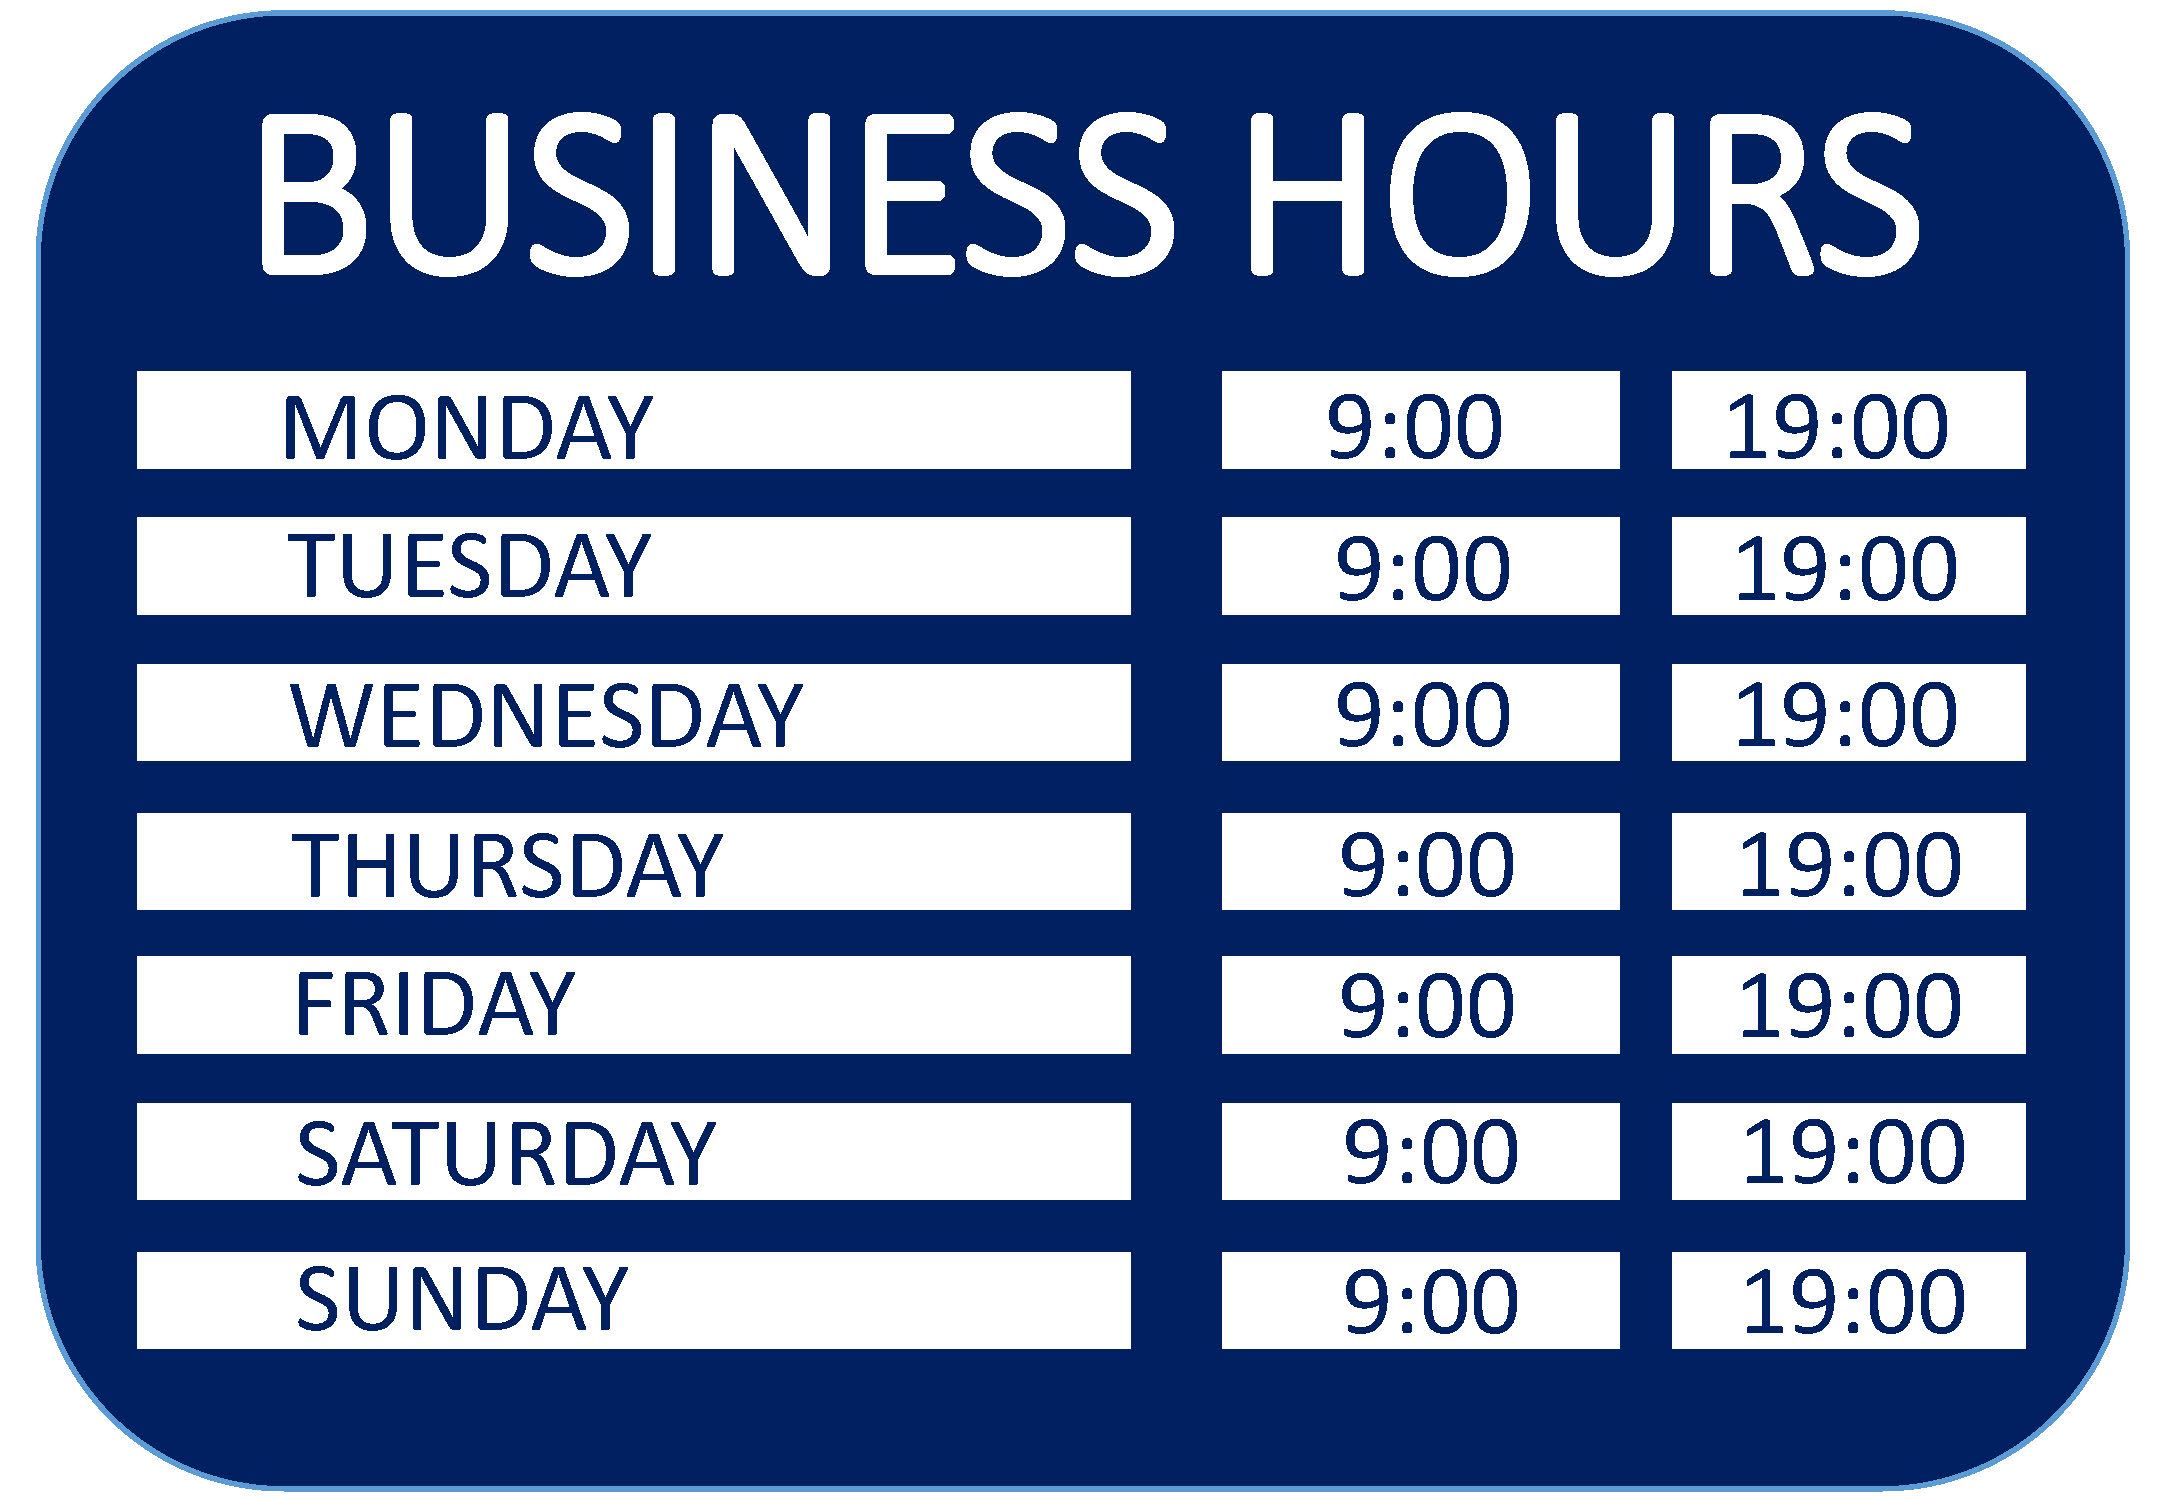 Operating Hours Sign main image